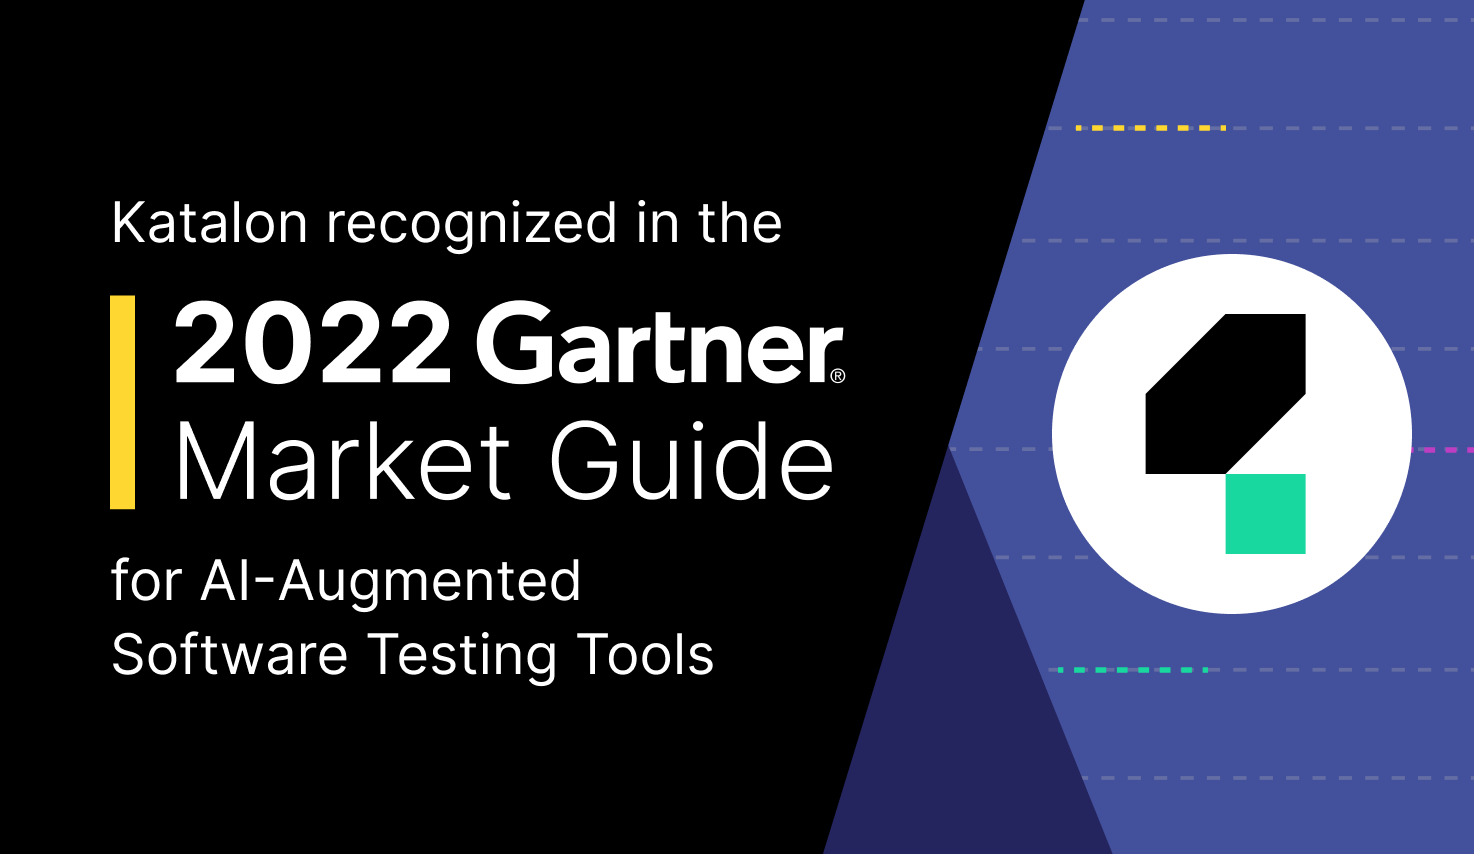 Katalon recognized in 2022 Gartner Market Guide for AI-Augmented Software Testing Tools - featured image